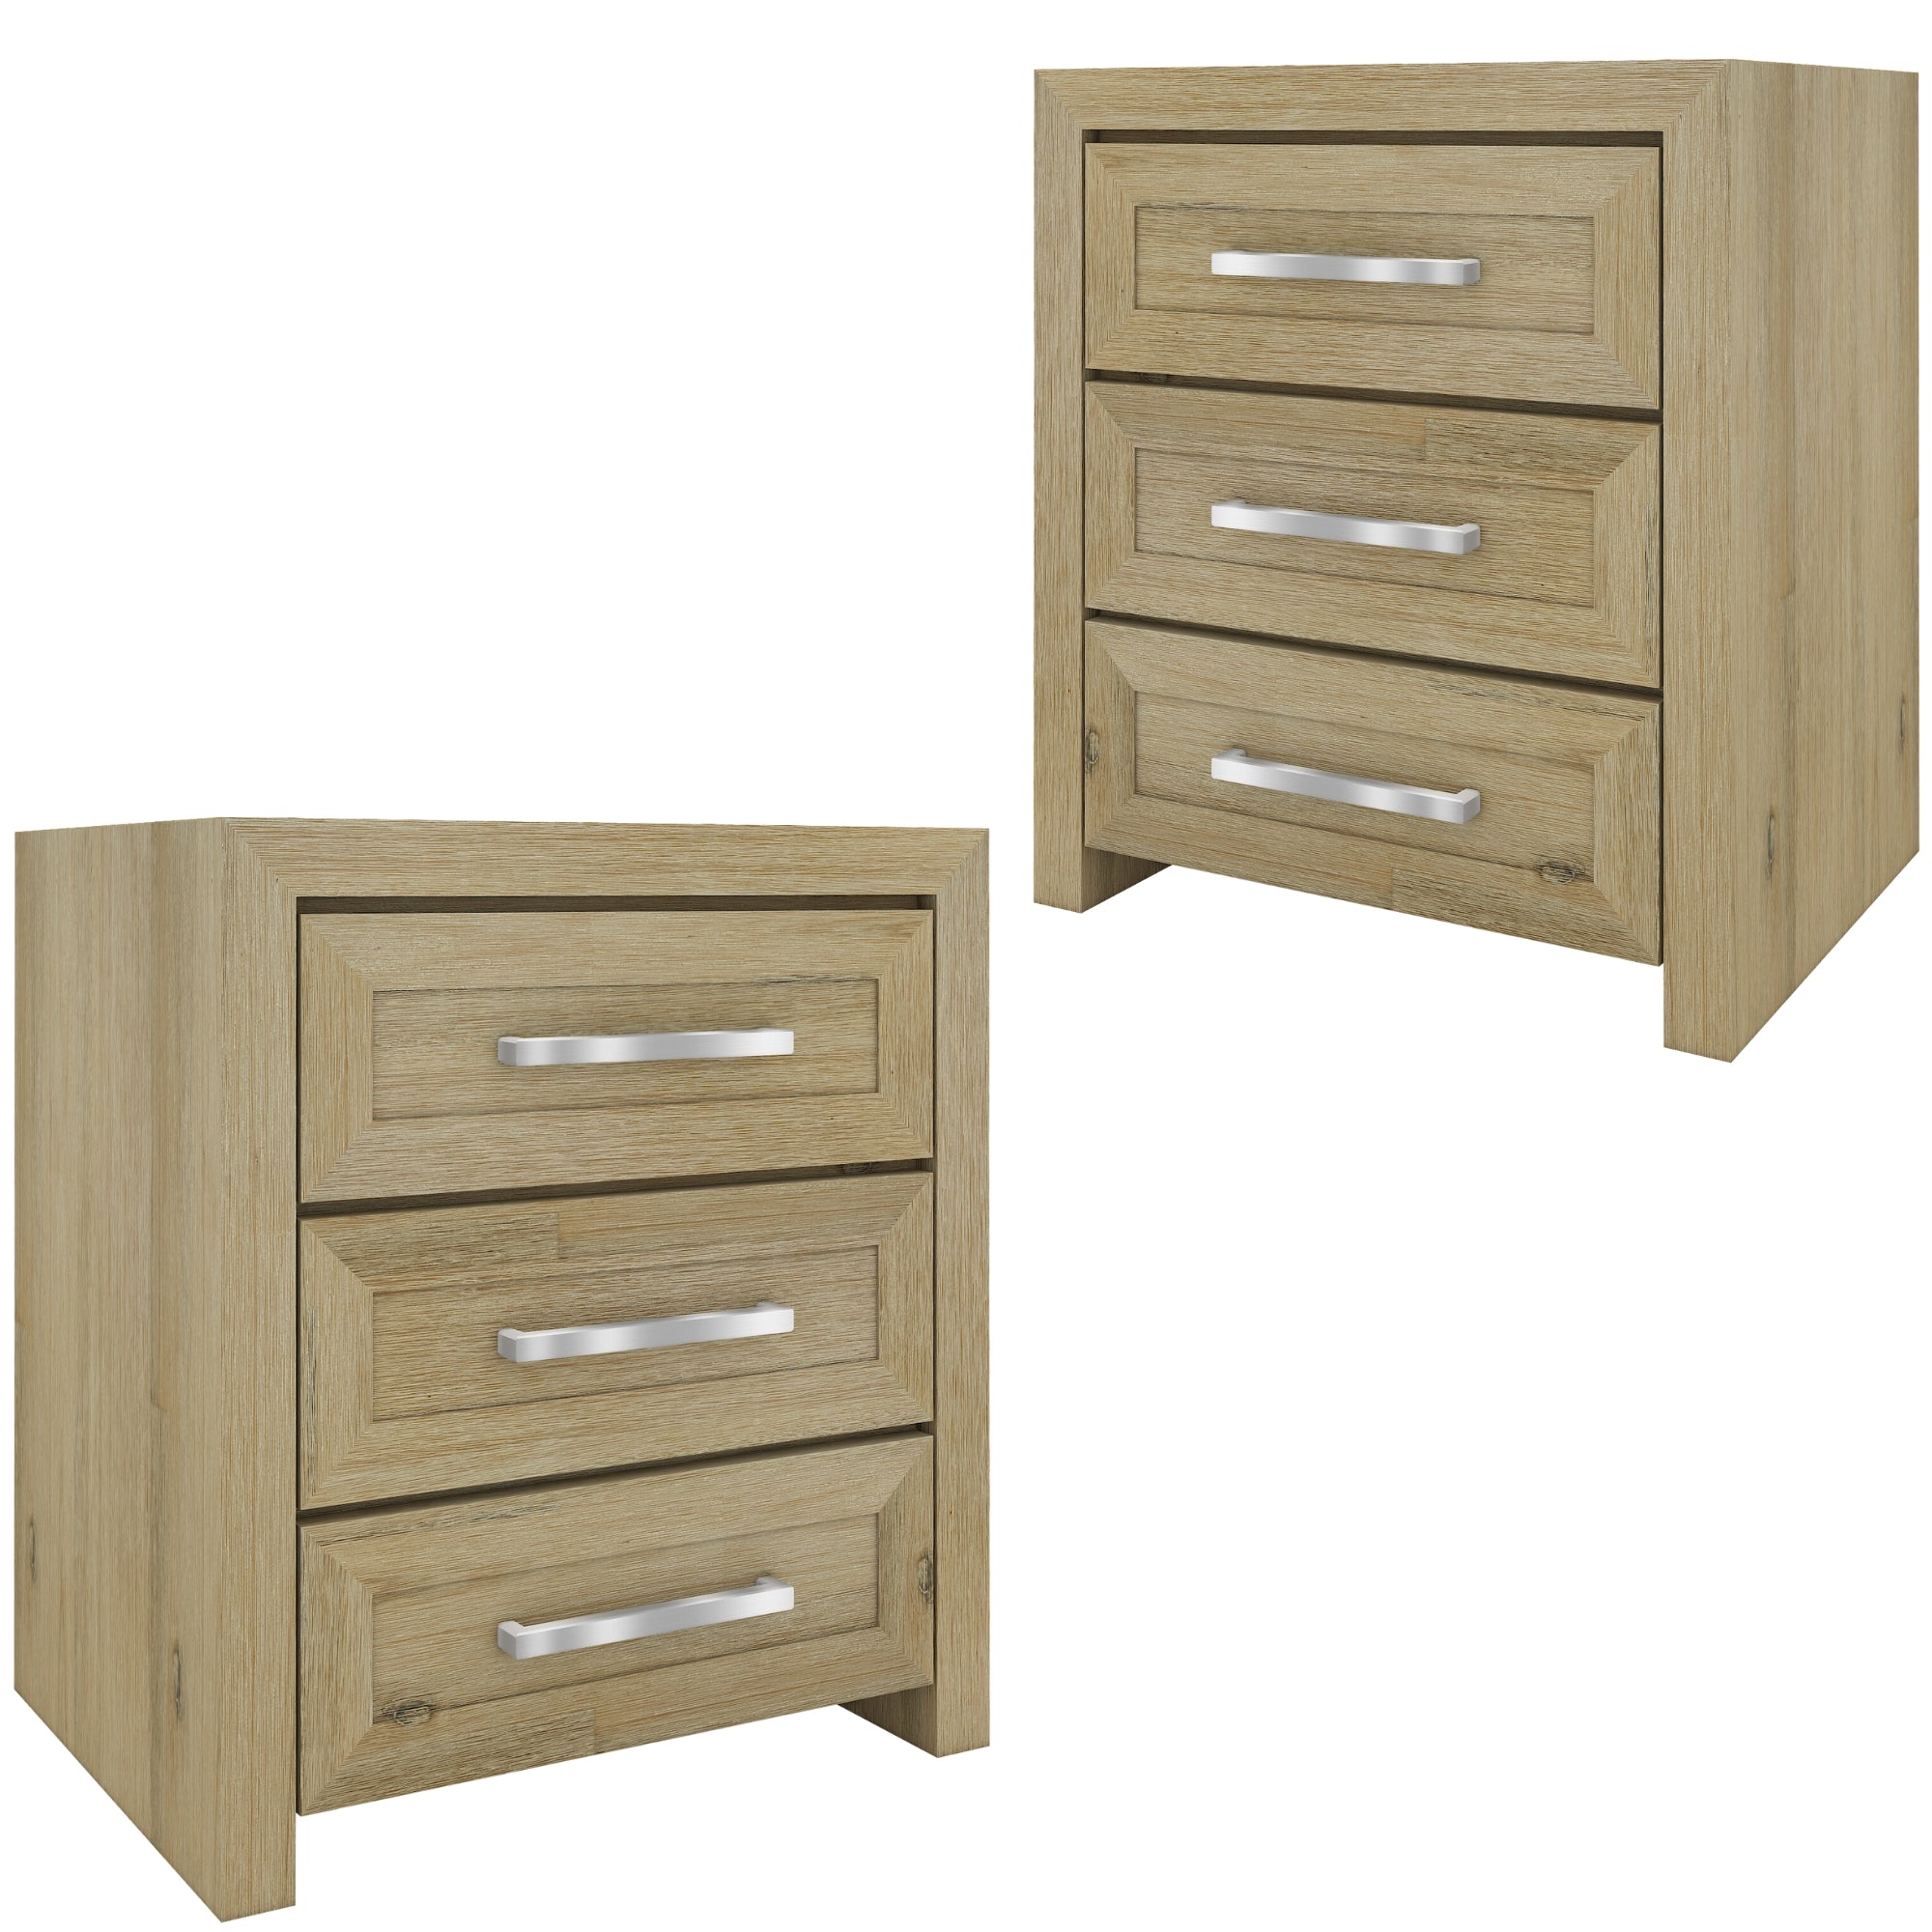 Gracelyn Set of 2 Bedside Nightstand 3 Drawers Bed Storage Cabinet - Smoke - SILBERSHELL